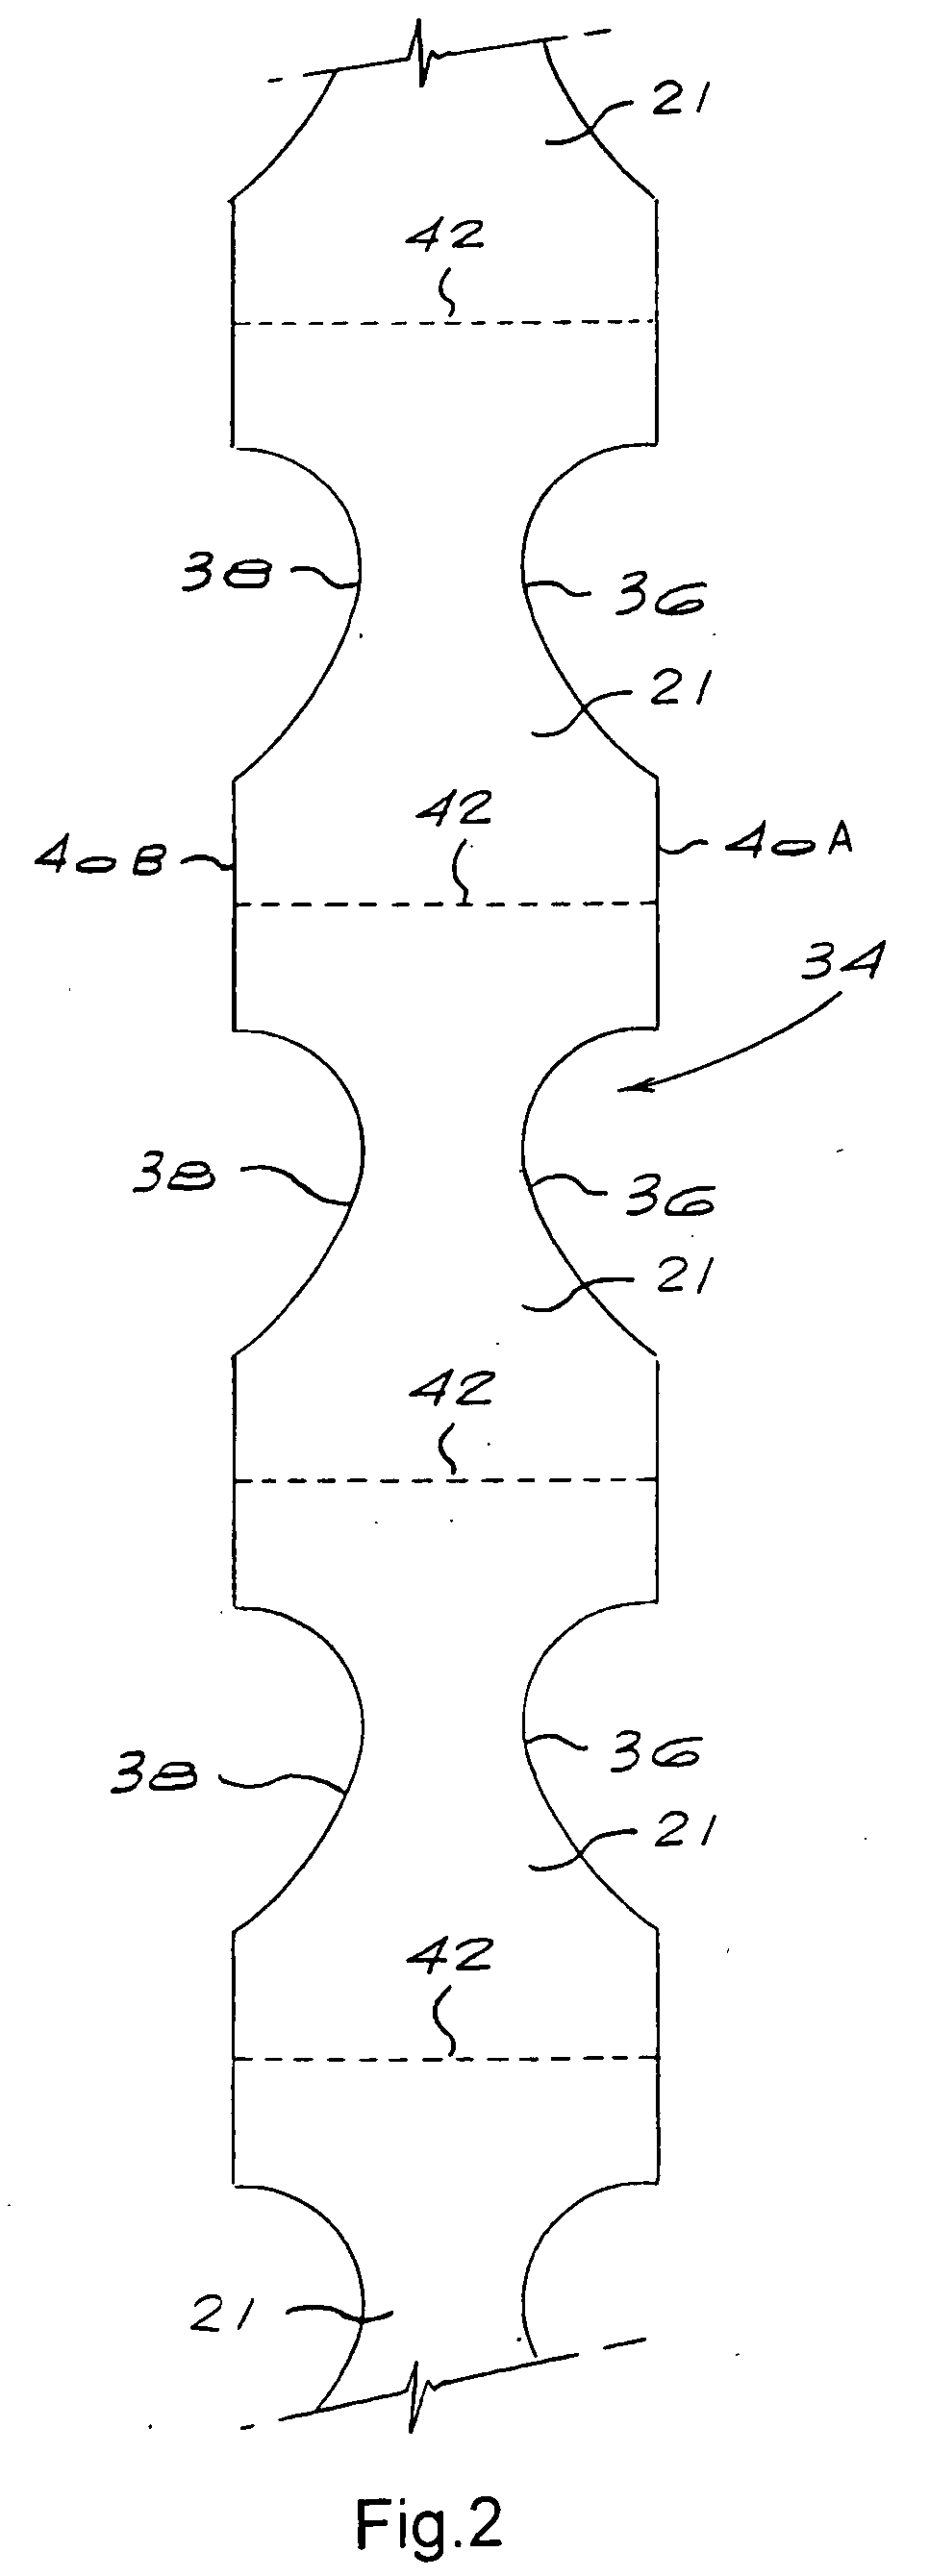 Method for bonding surfaces on a web